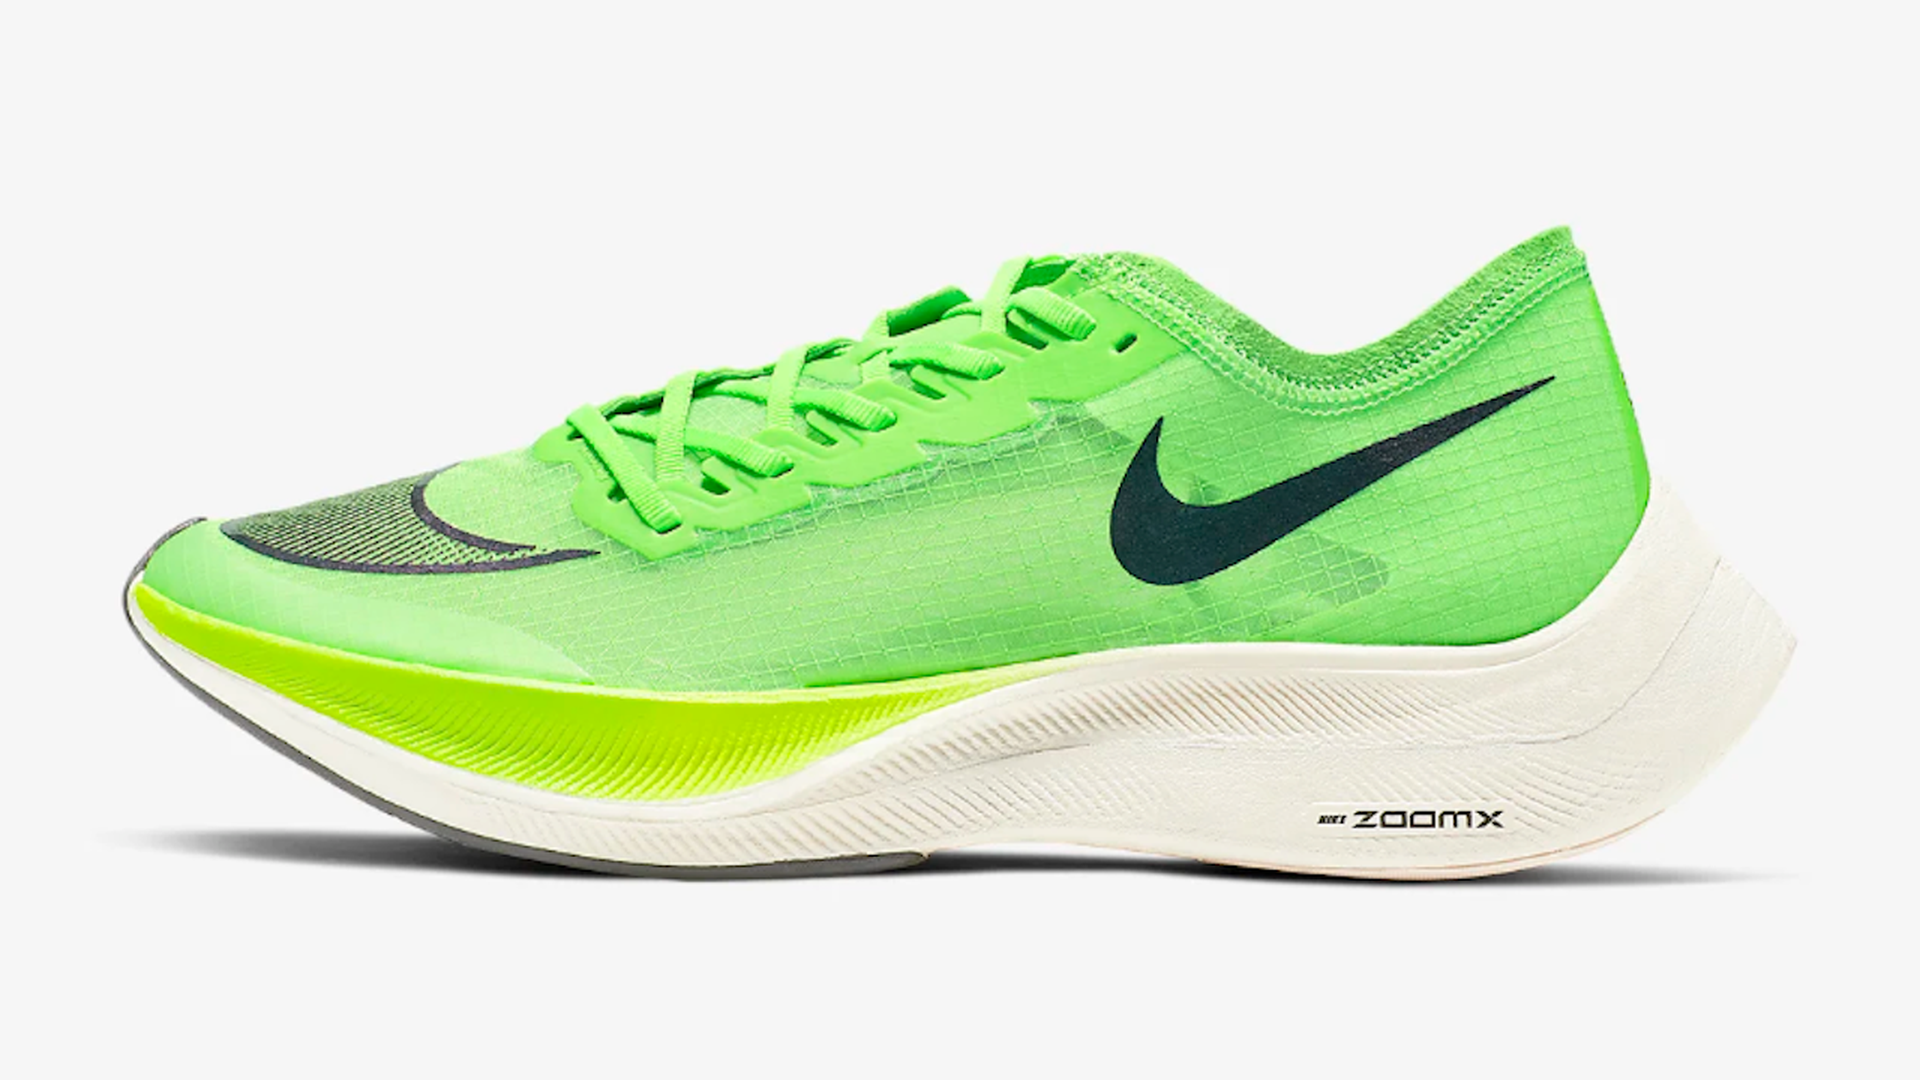 The Nike ZoomX Vaporfly